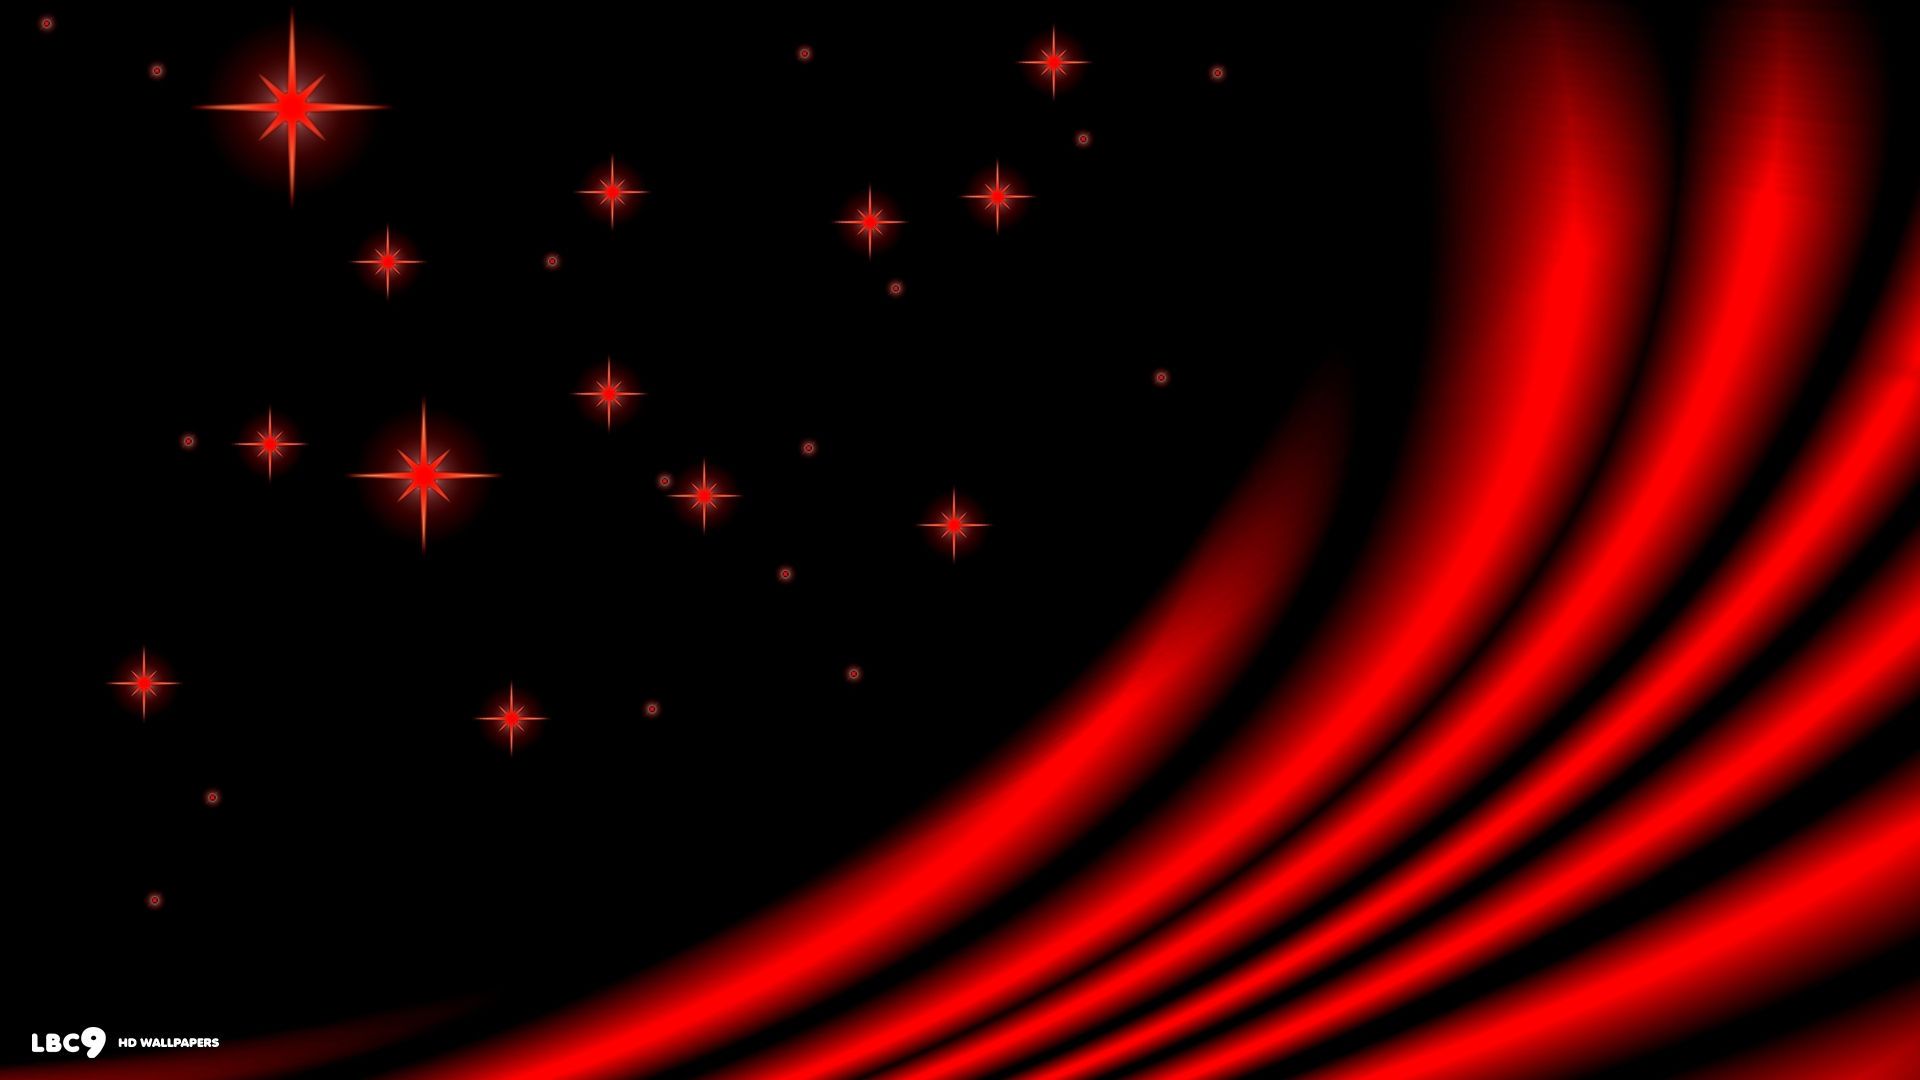 Red Abstract 1080P Wallpapers